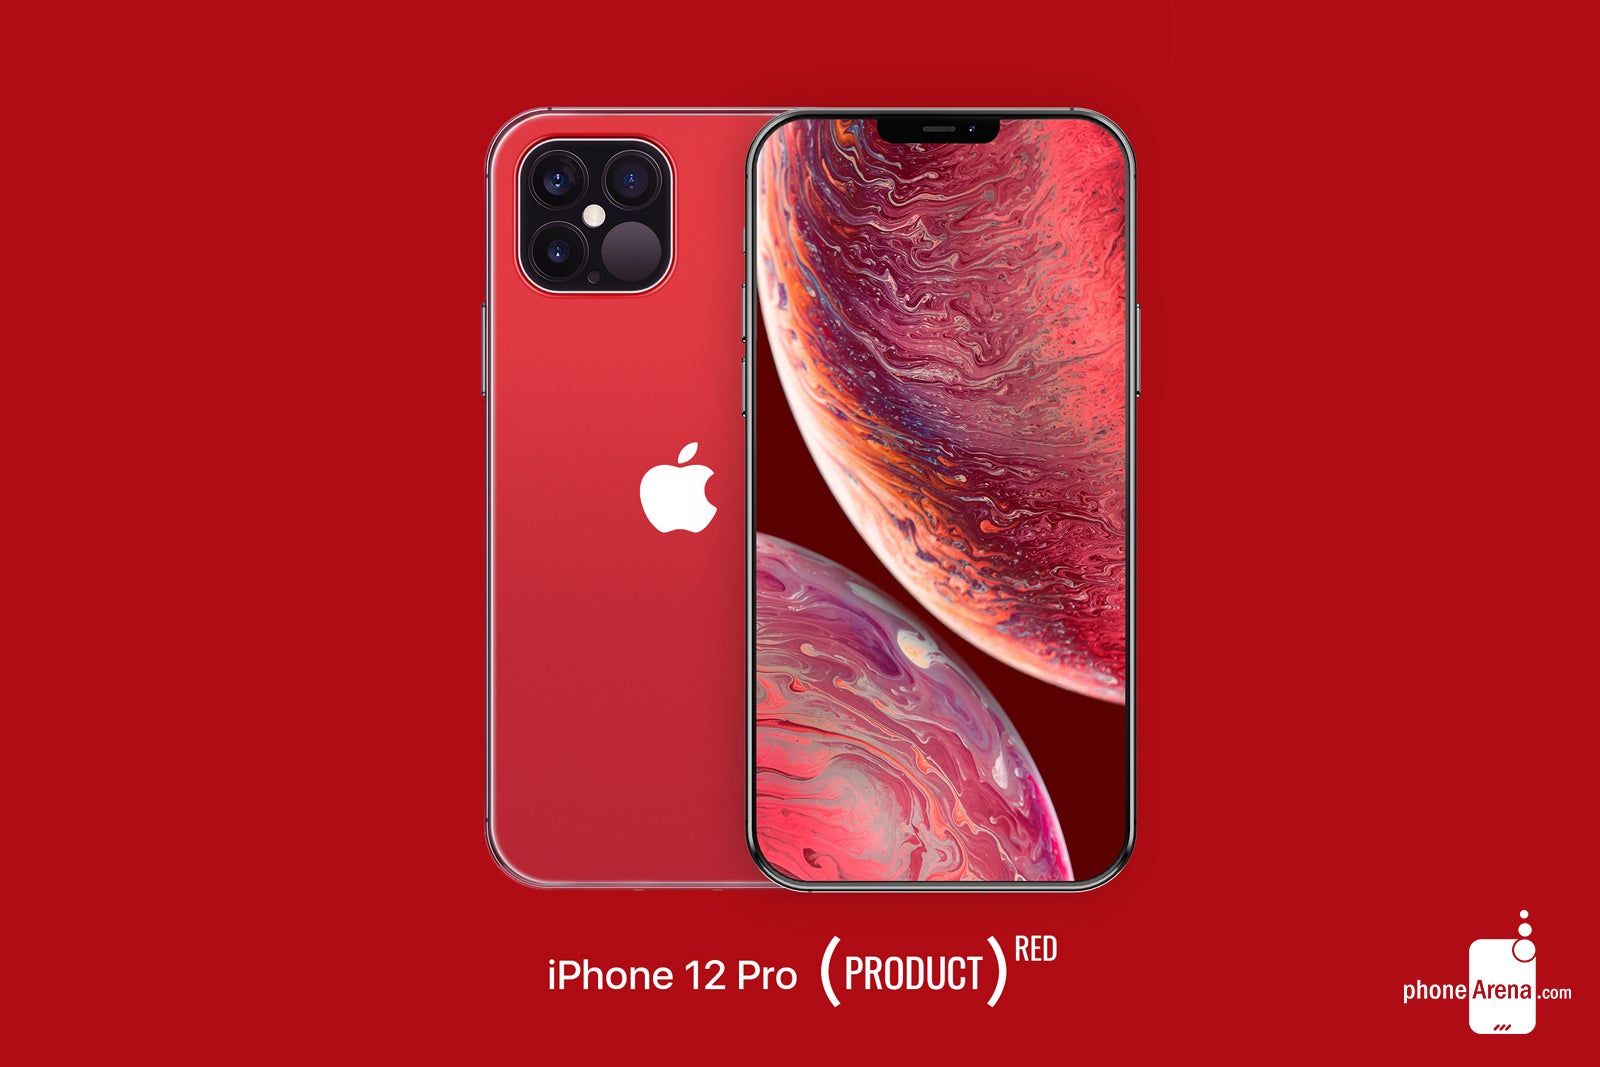 iPhone 12 Pro PRODUCT Red design concept - Apple's 2020 iPhone 12 lineup pictured in beautiful design renders